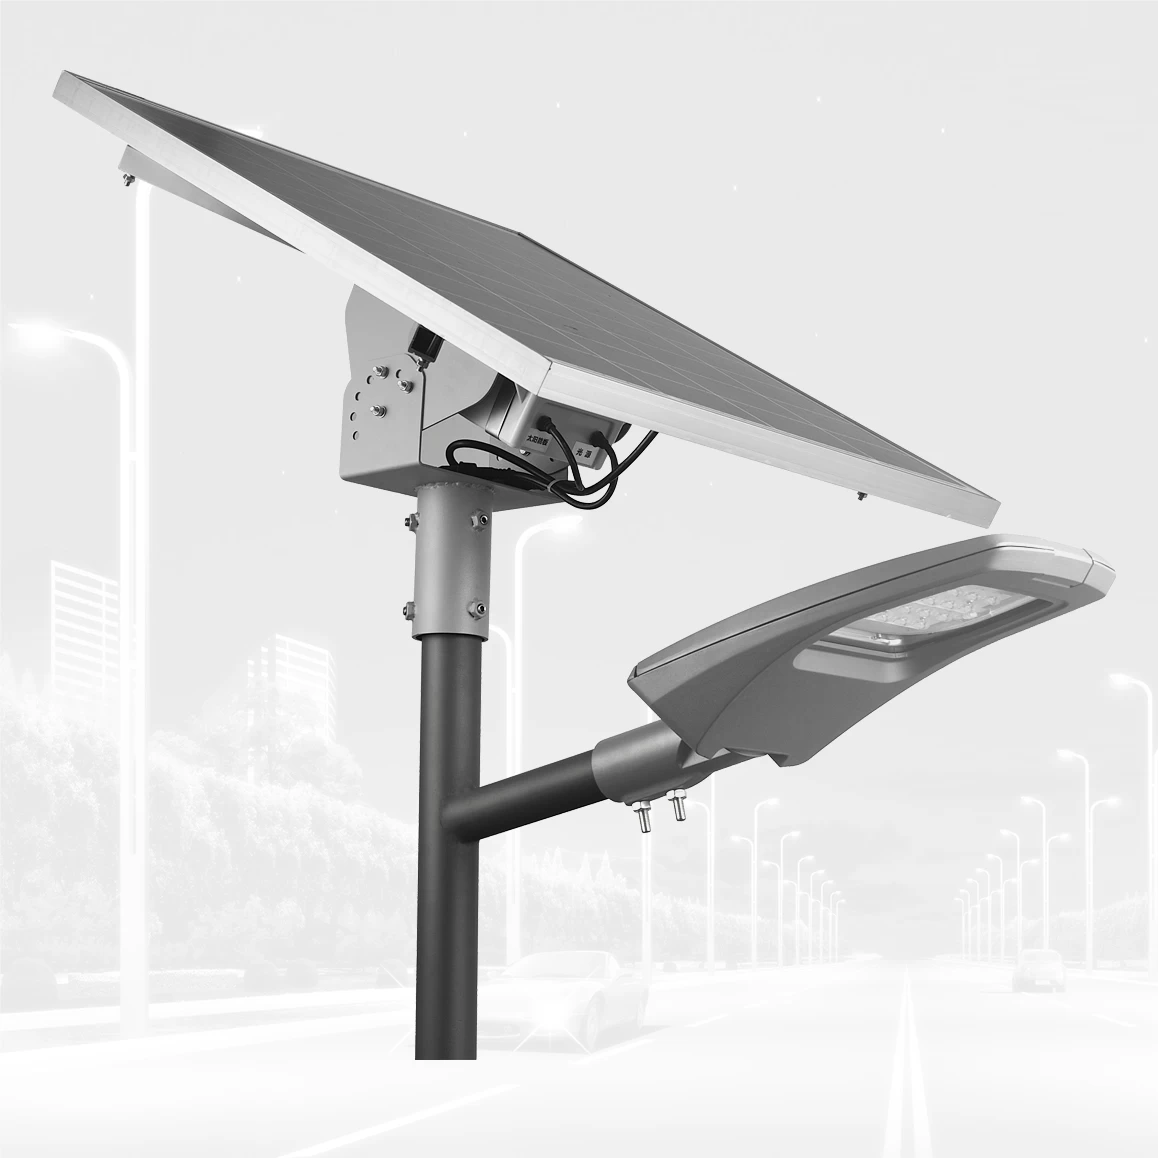 YMLED-6801 Solar street light 30w with contral system good waterproof made in china